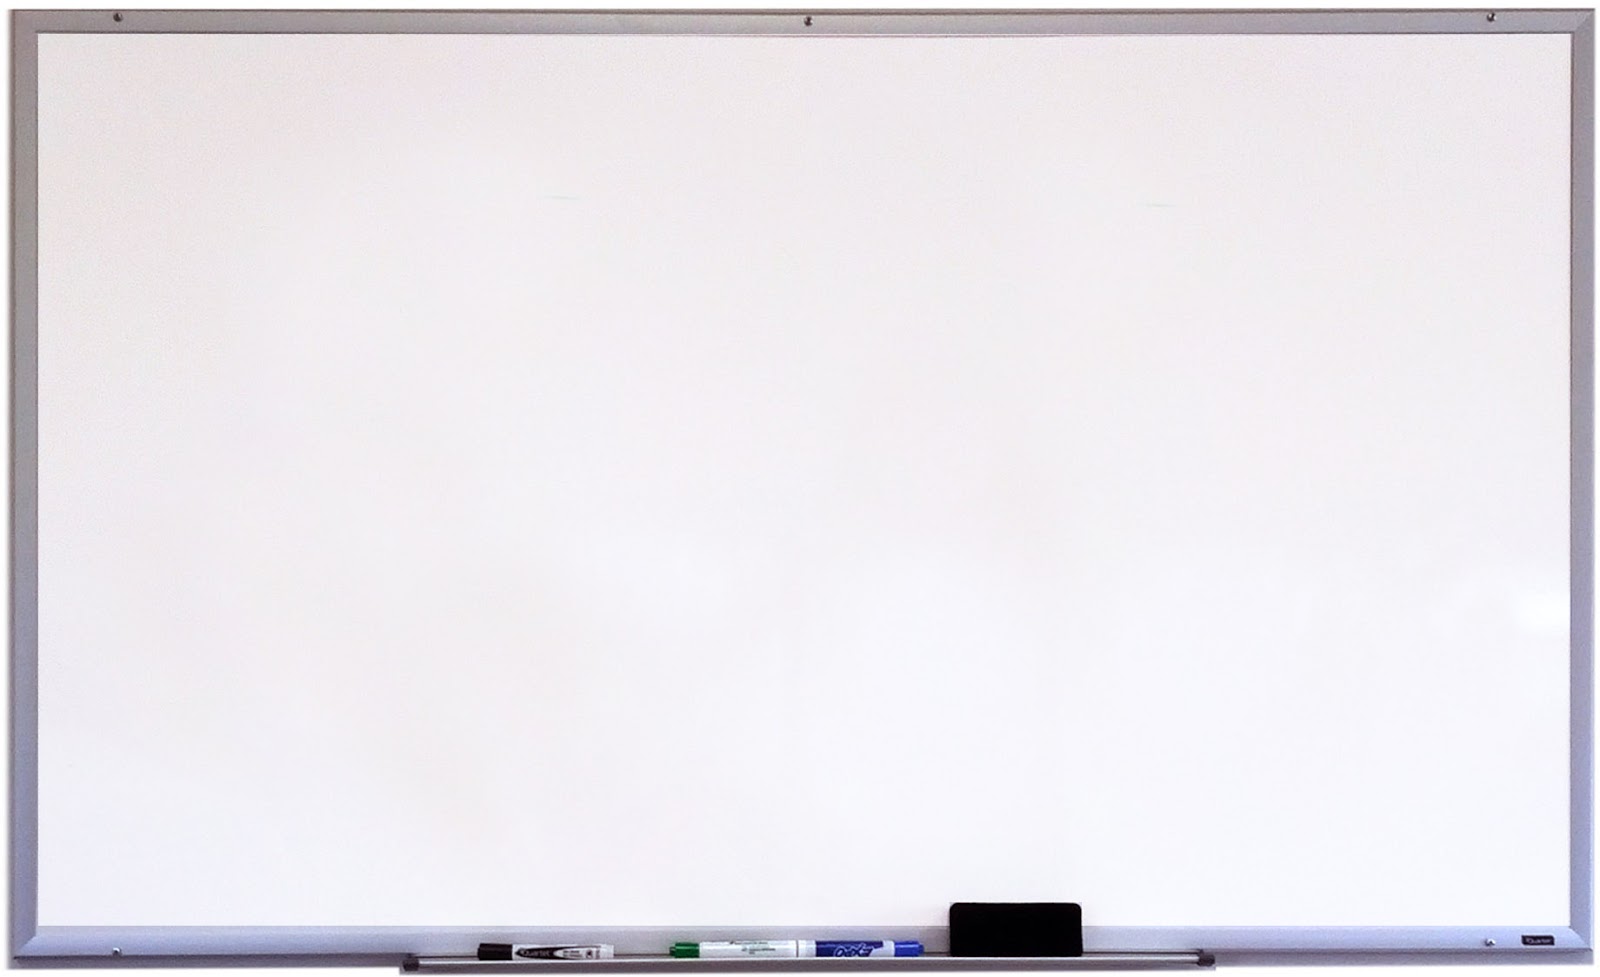 File:Whiteboard with markers.jpg - Wikimedia Commons